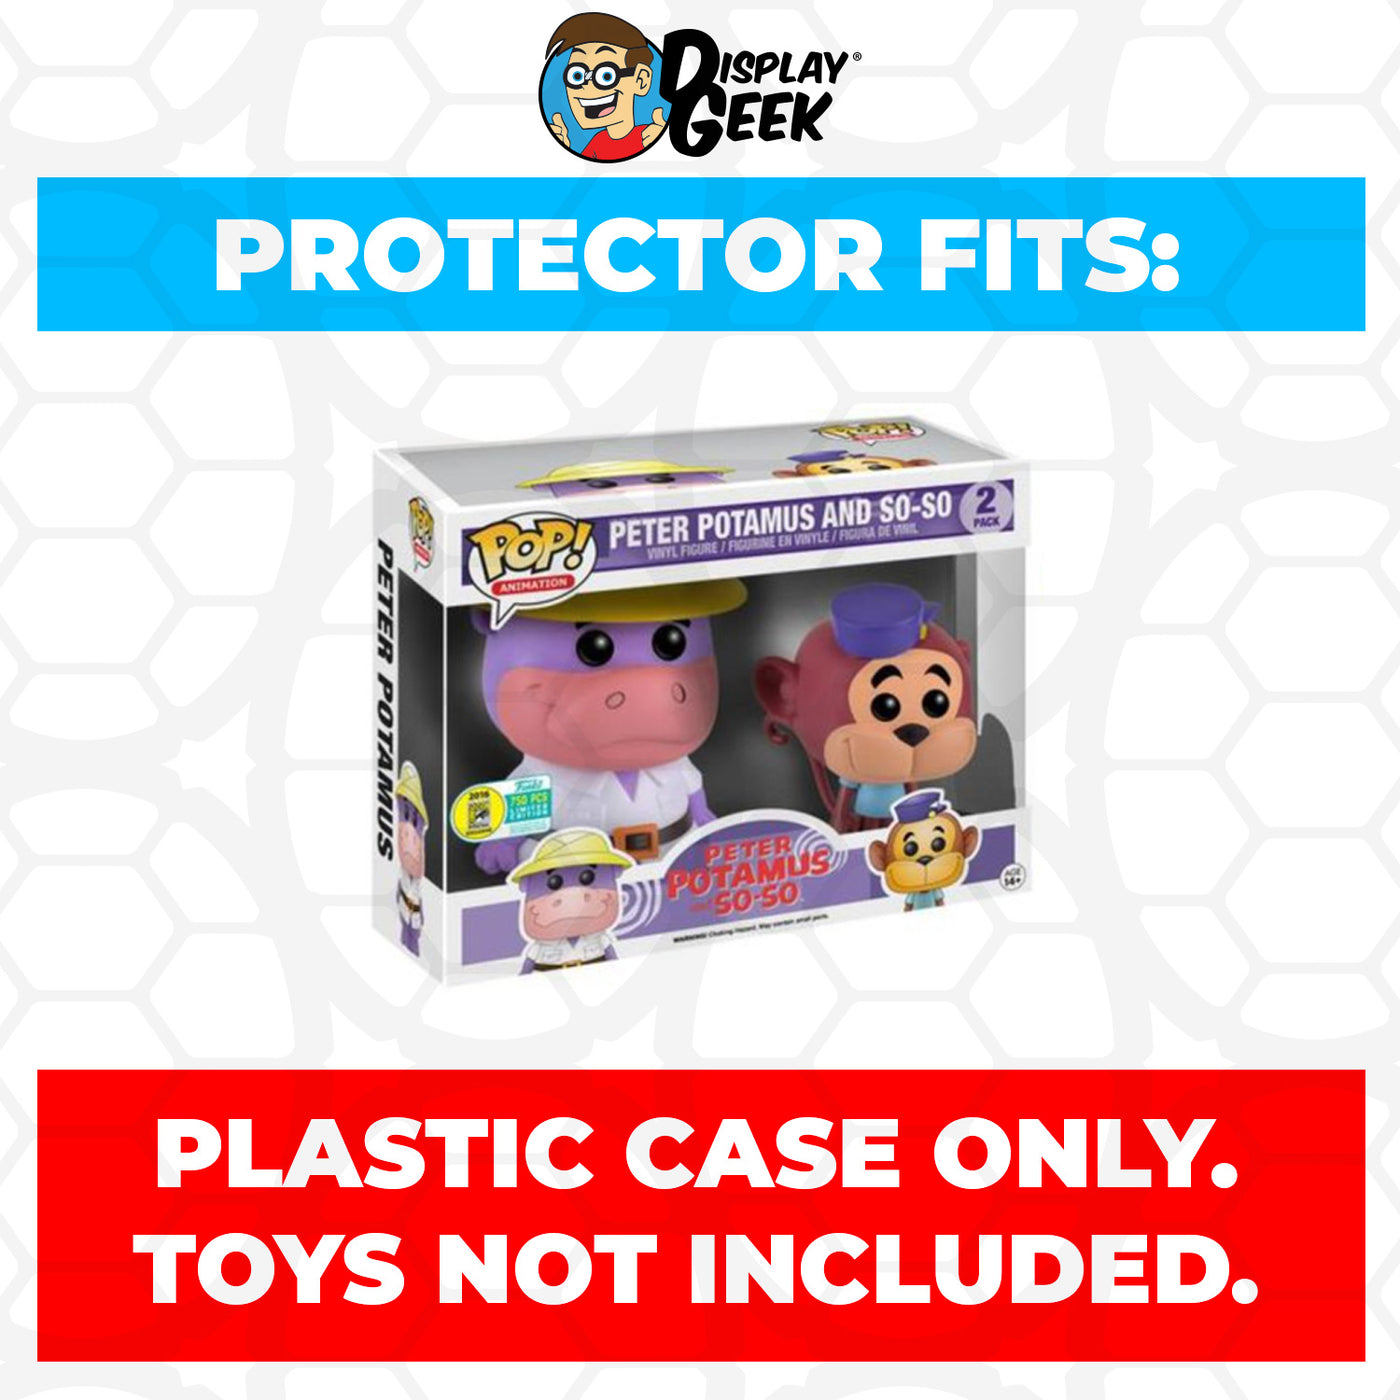 Pop Protector for 2 Pack Peter Potamus and So-So SDCC Funko Pop on The Protector Guide App by Display Geek